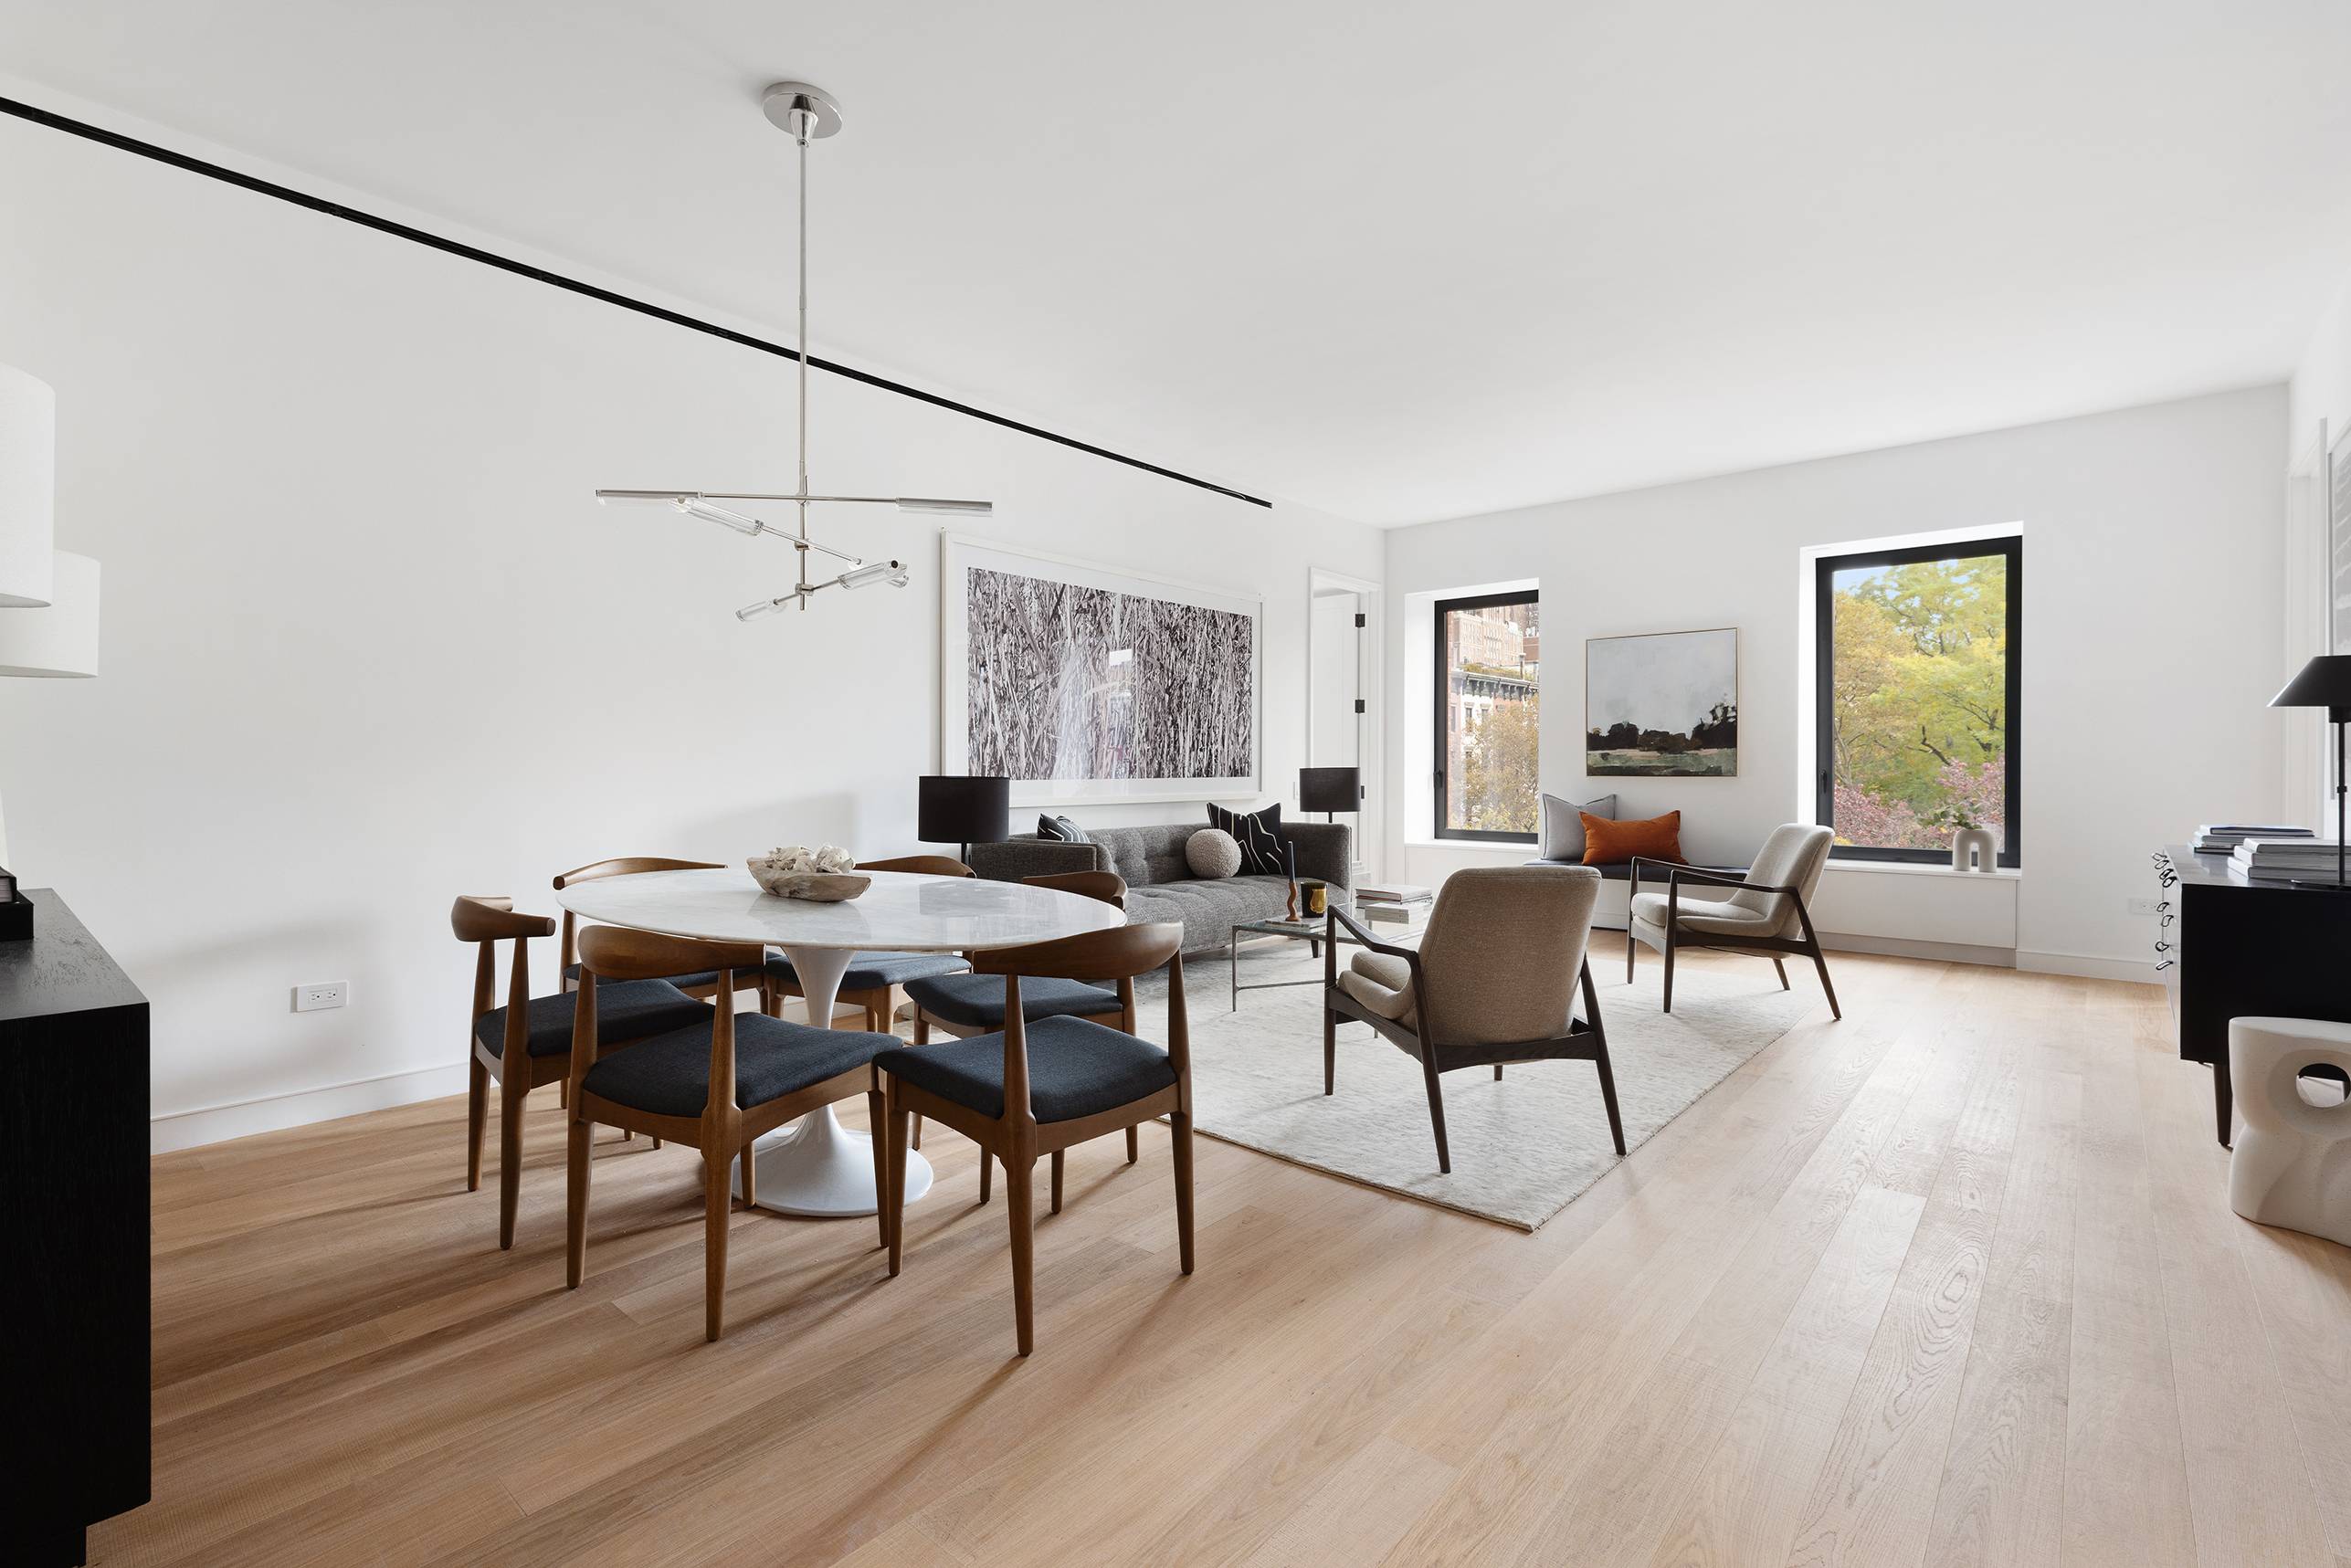 Perched at the corner of Tenth Avenue and 22nd Street, across from Clement Clarke Moore Park, Park House Chelsea is a collection of ten meticulously designed park front residences by ...